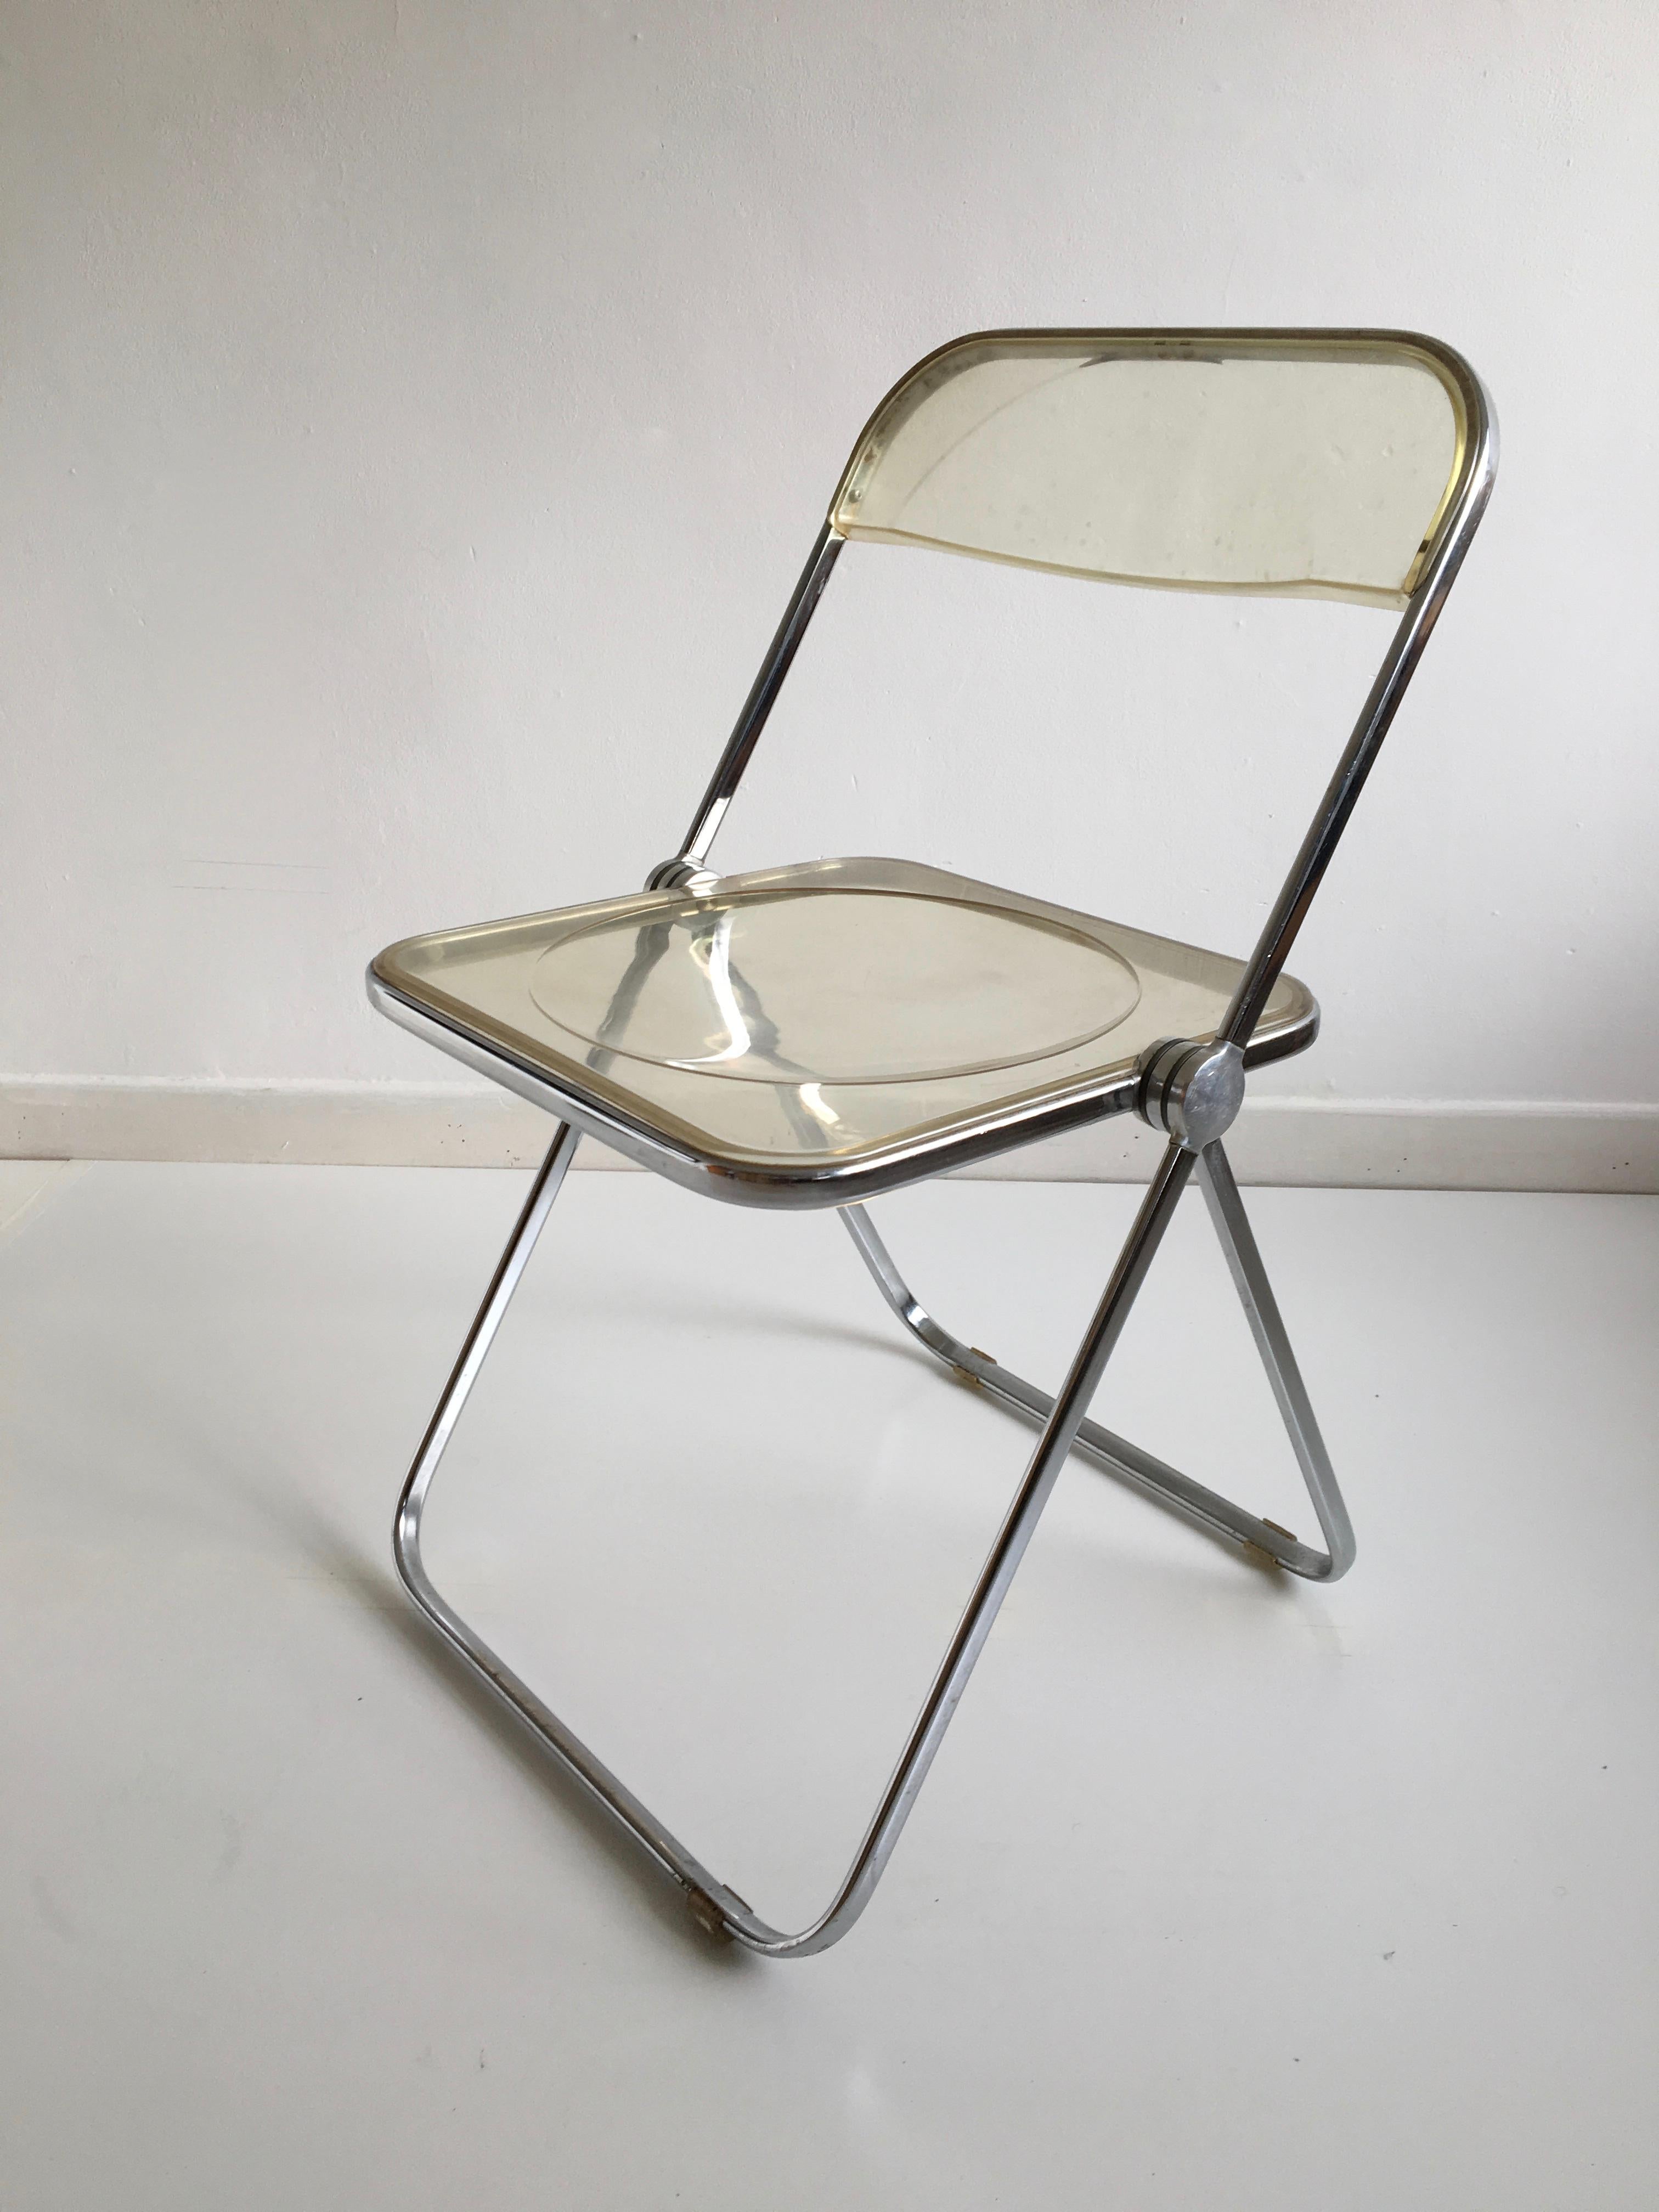 Chrome plate and Lucite folding chair designed by Giancarlo Piretti for Castelli, Italy, circa 1960. An award winning Classic featured at MOMA.

Dimensions (cm, approximate):
Height 76
Width 47
Depth 48.